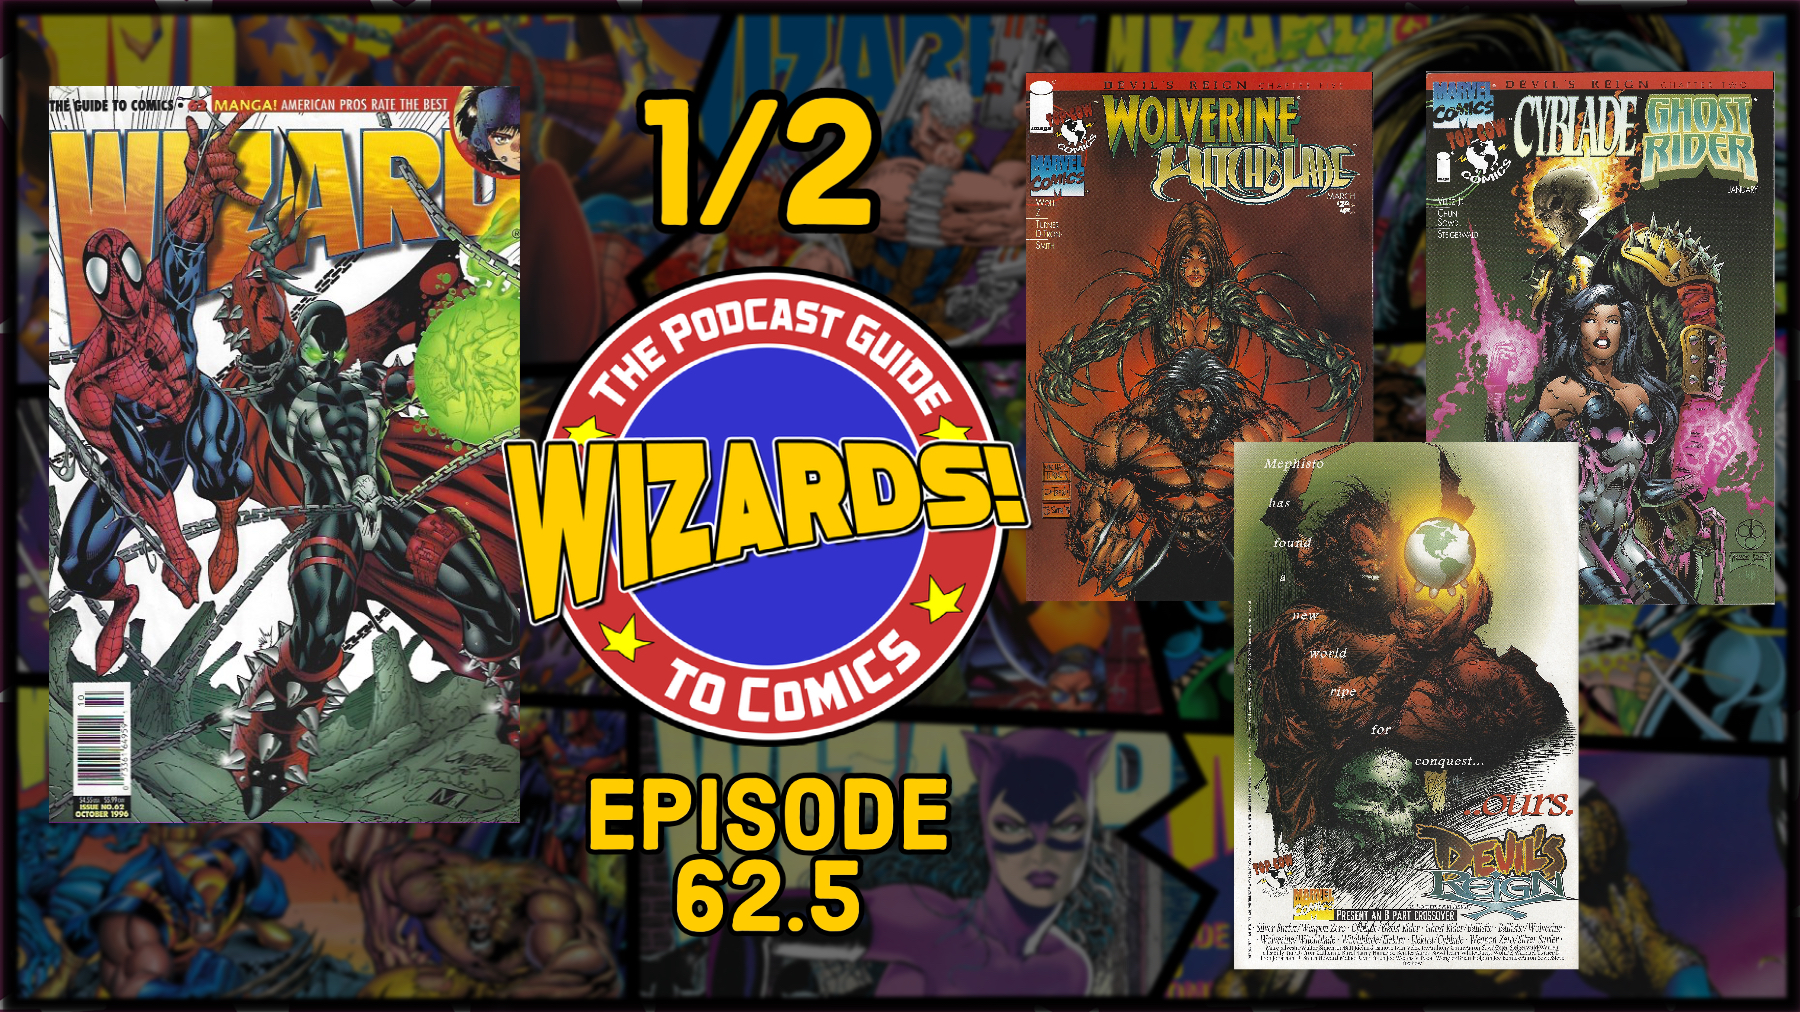 WIZARDS The Podcast Guide To Comics | Episode 62.5